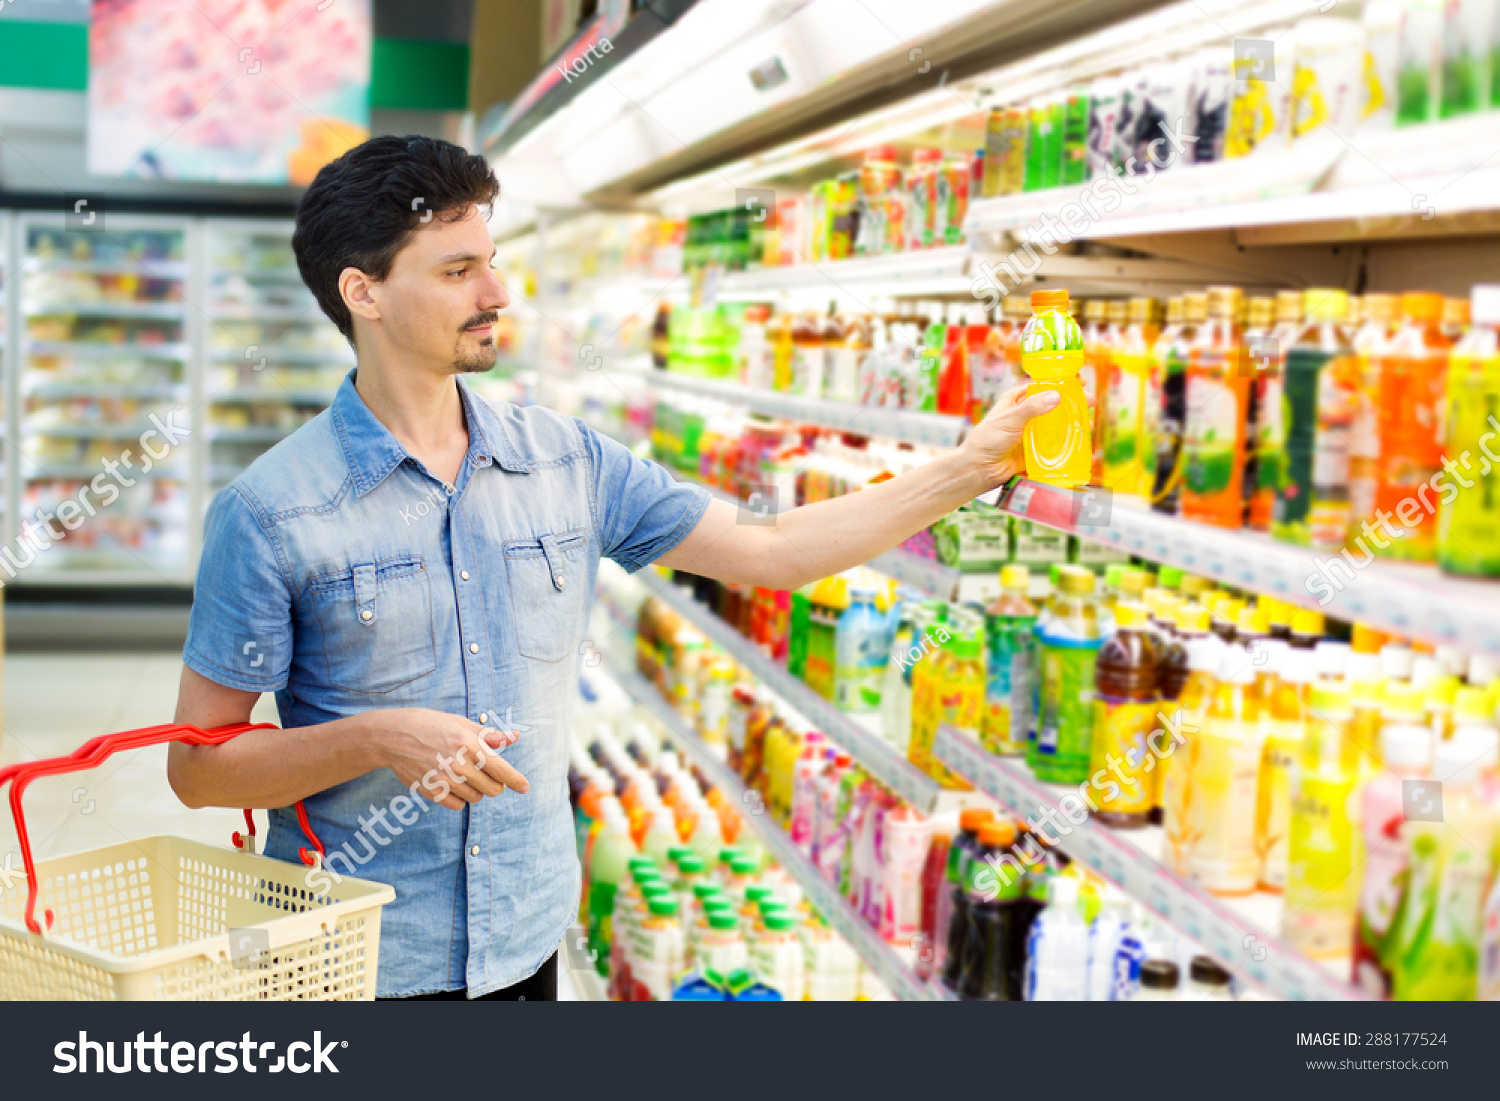 Man In A Supermarket Buying A Bottle Of Juice Stock Photo 288177524 ...